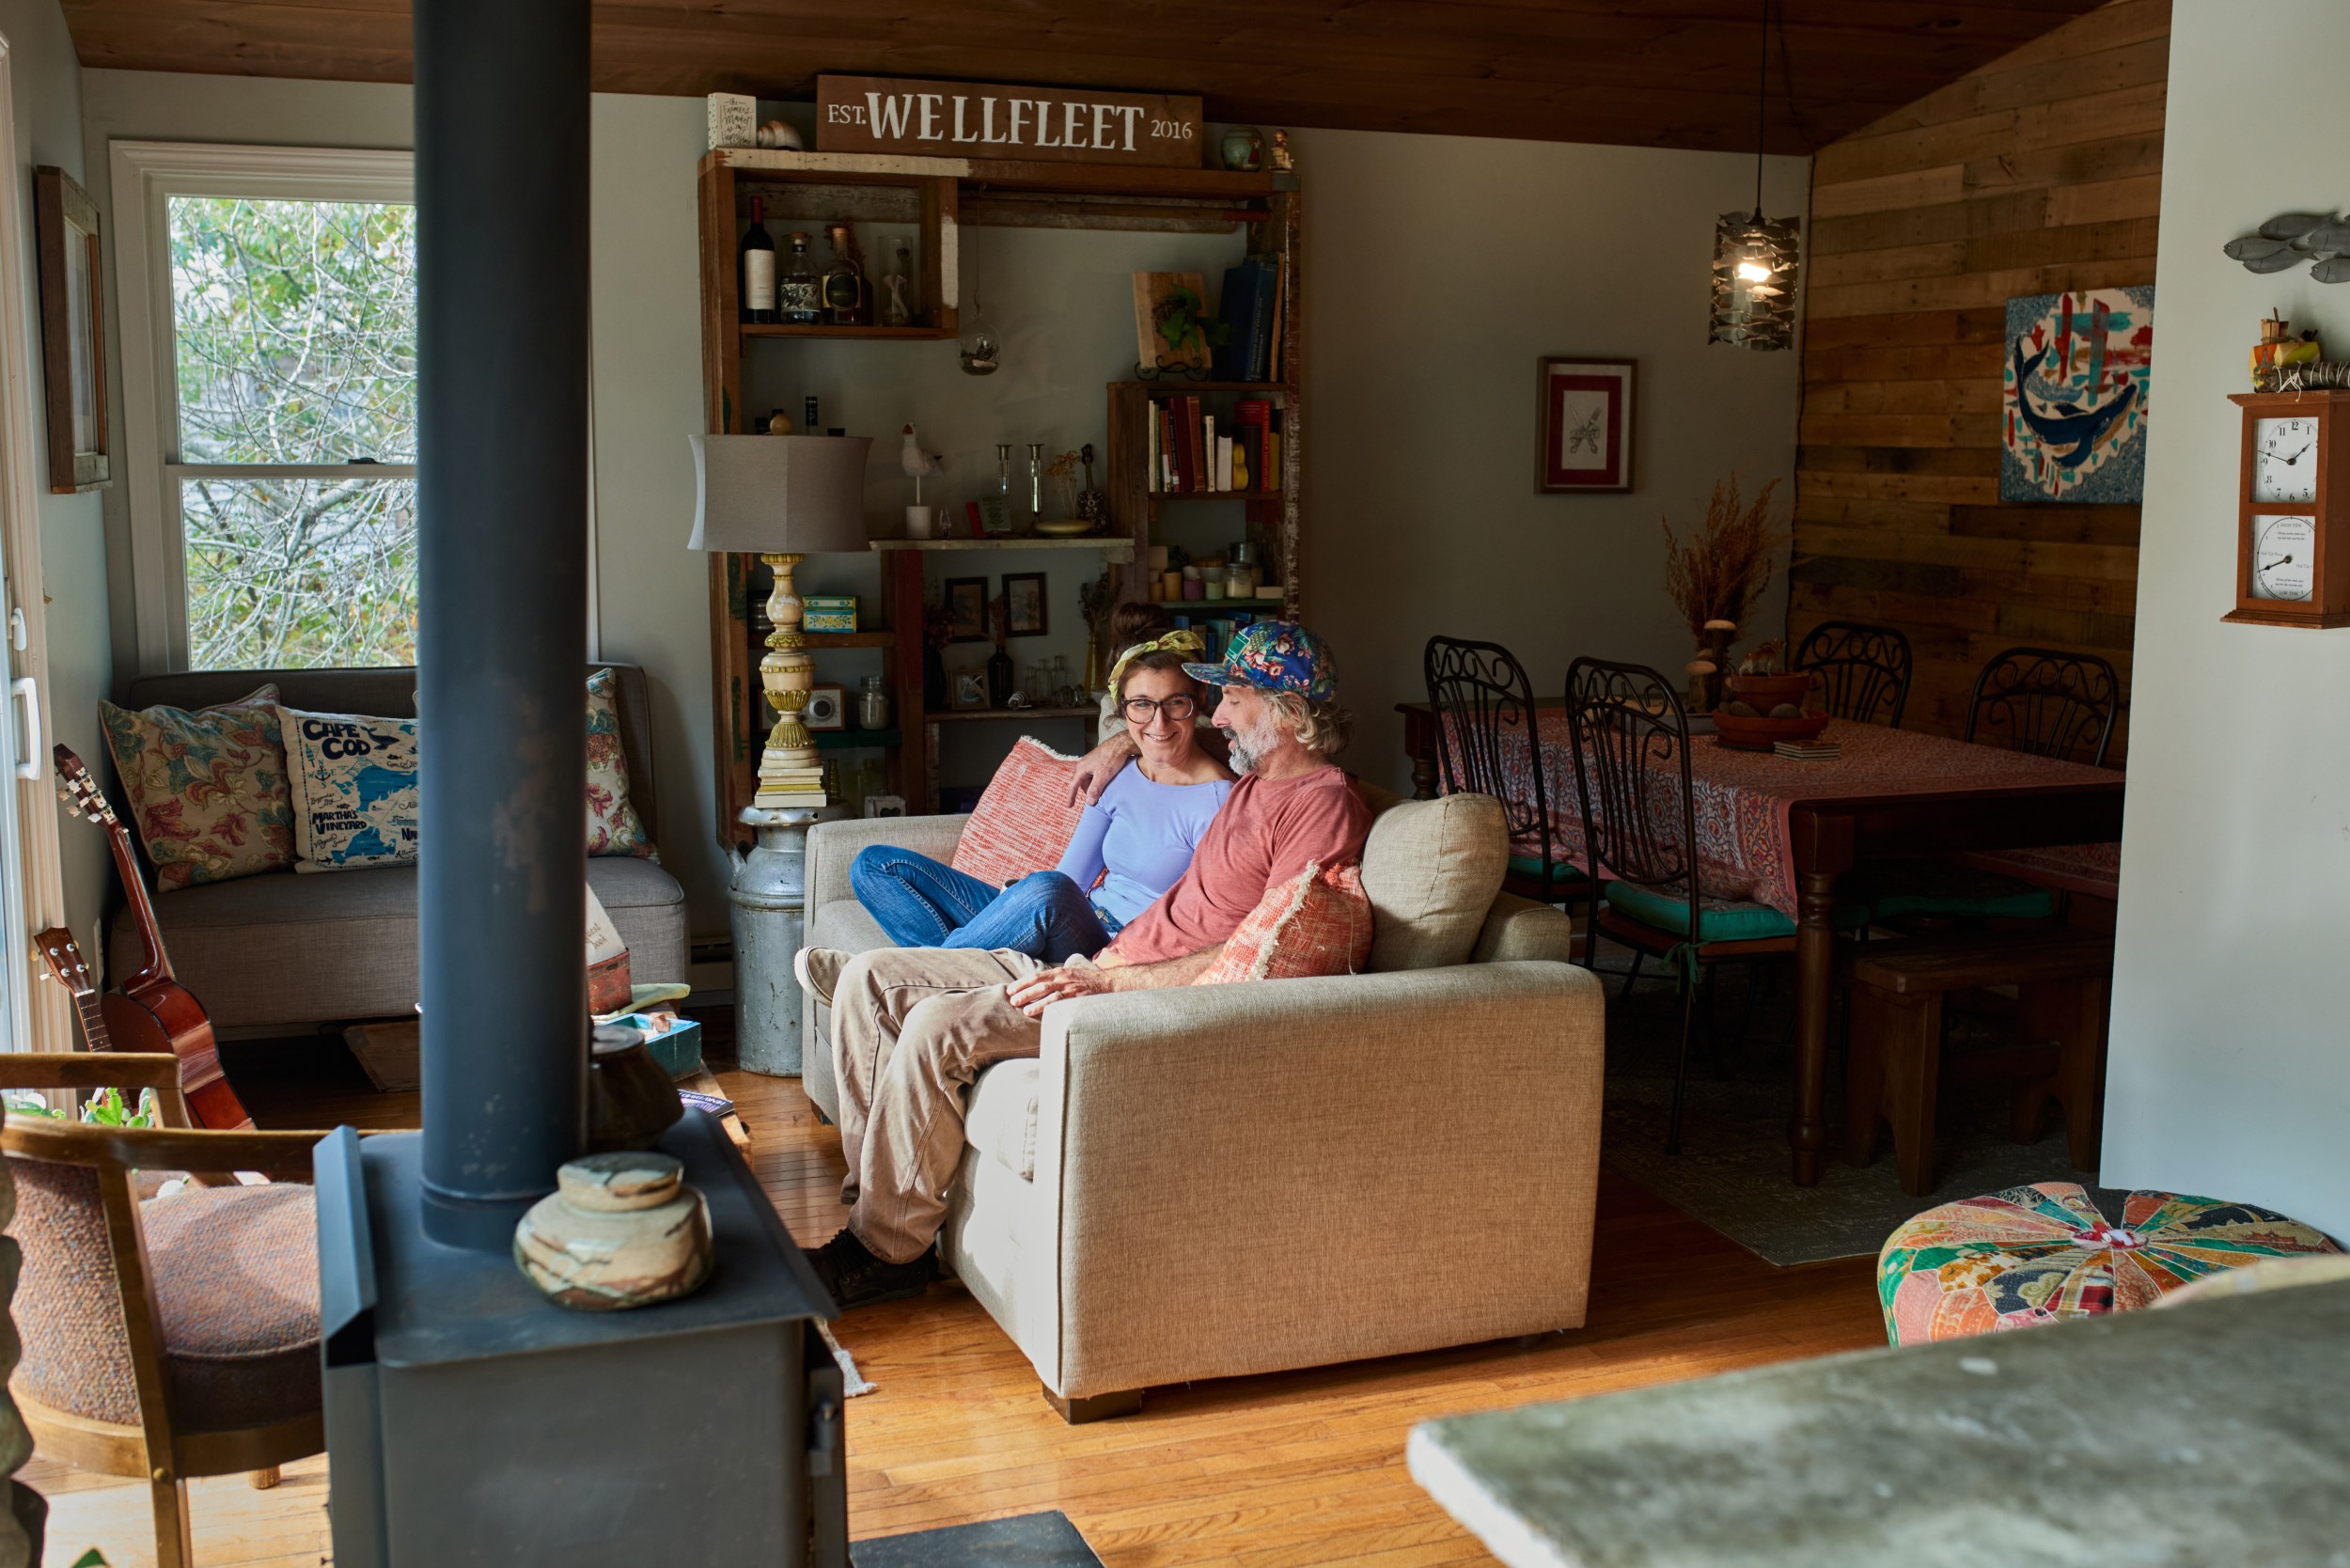 Man sits with his arm around a smiling woman on a couch in a quaint living room near a wood stove